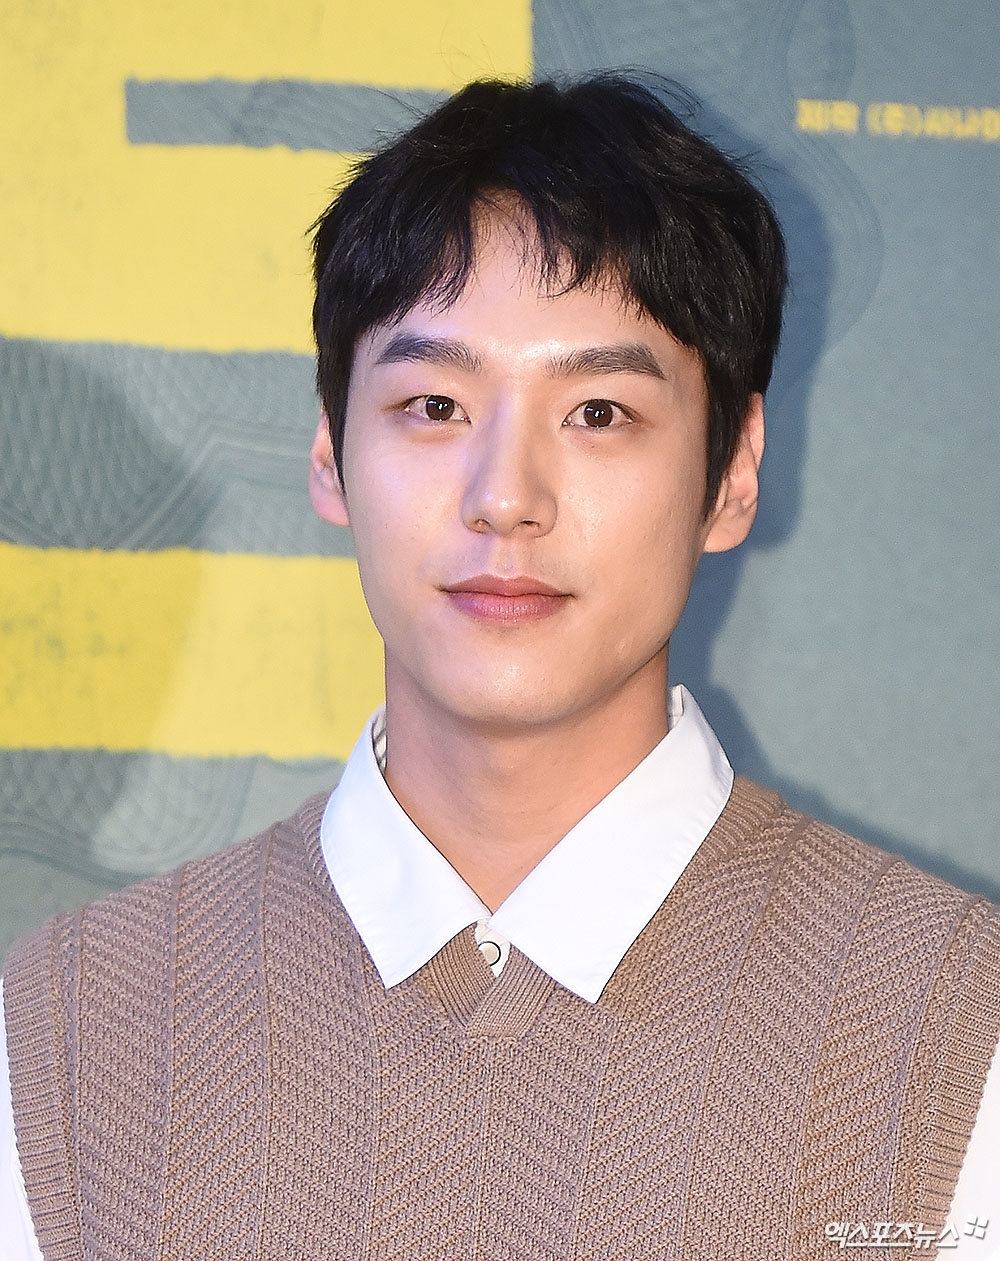 Actor Kwak Si-yang, who attended the VIP premiere of the movie Don held at Megabox COEX in Seoul, Seoul on the afternoon of the 18th, is posing.